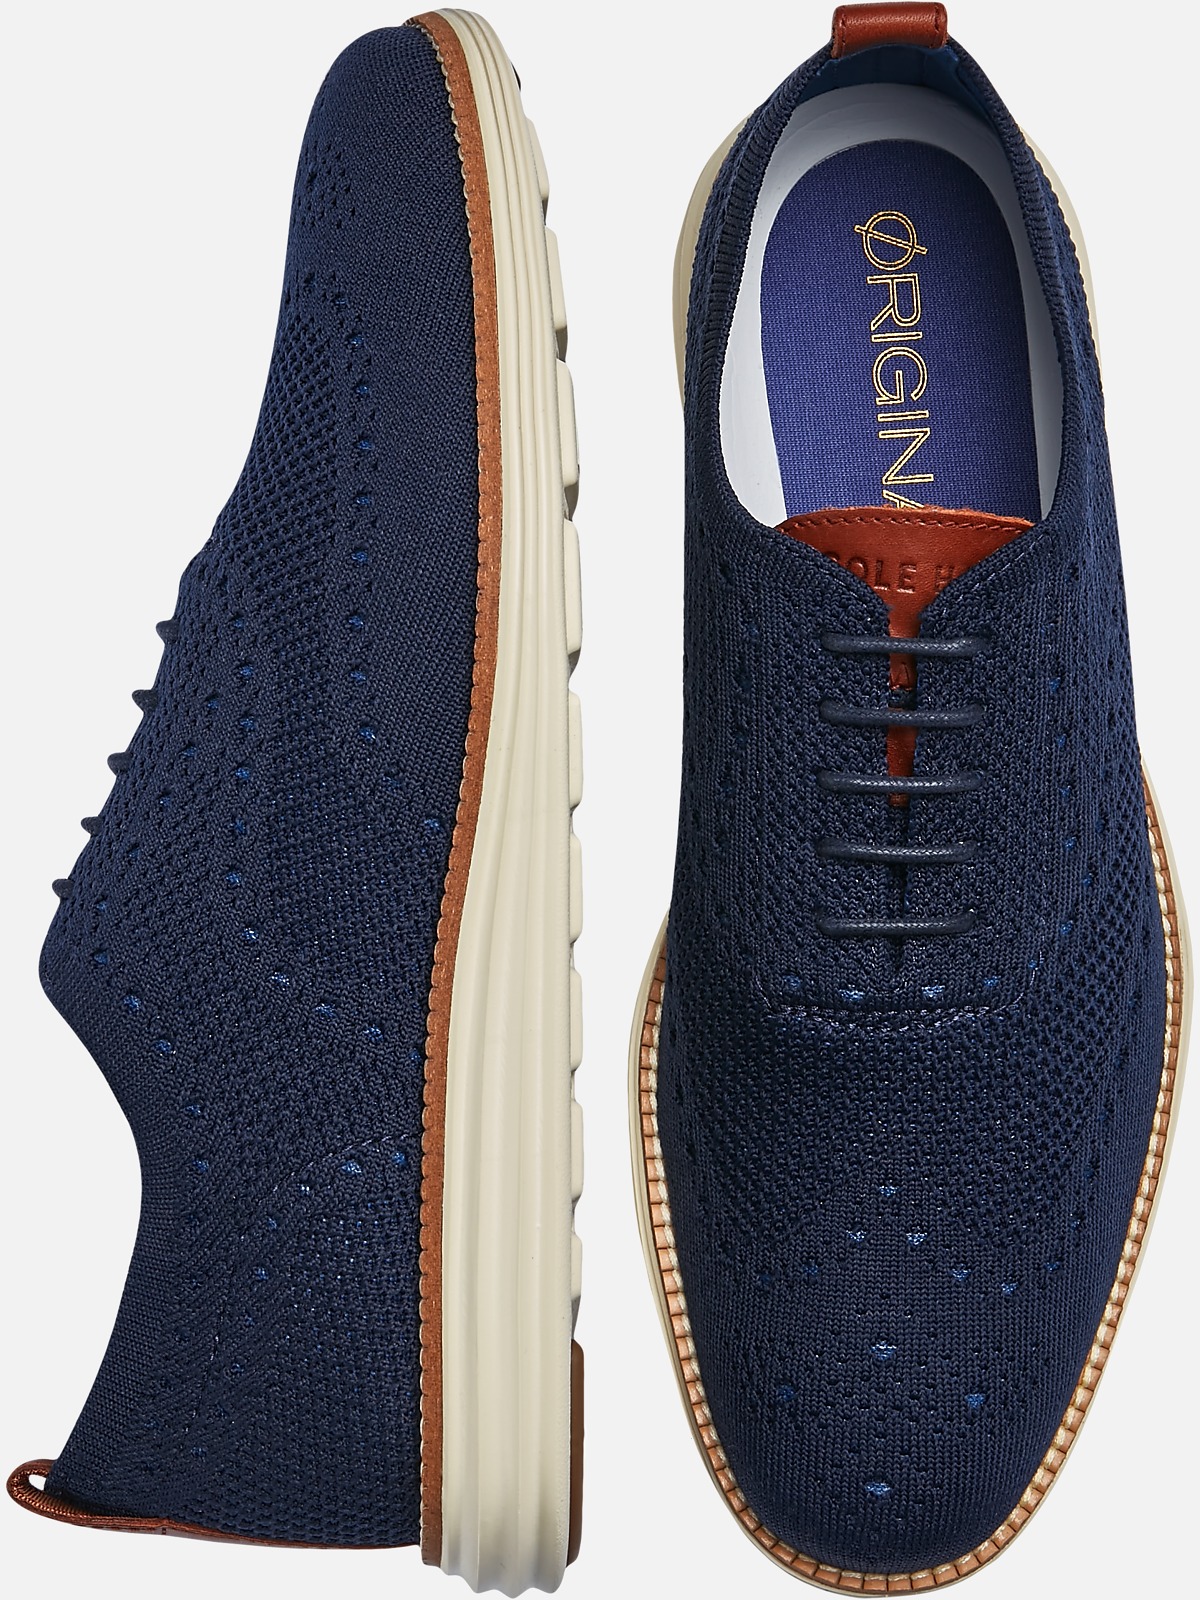 Cole Haan Grand Stitchlite Wingtip Casual Oxfords | All Sale| Men's ...